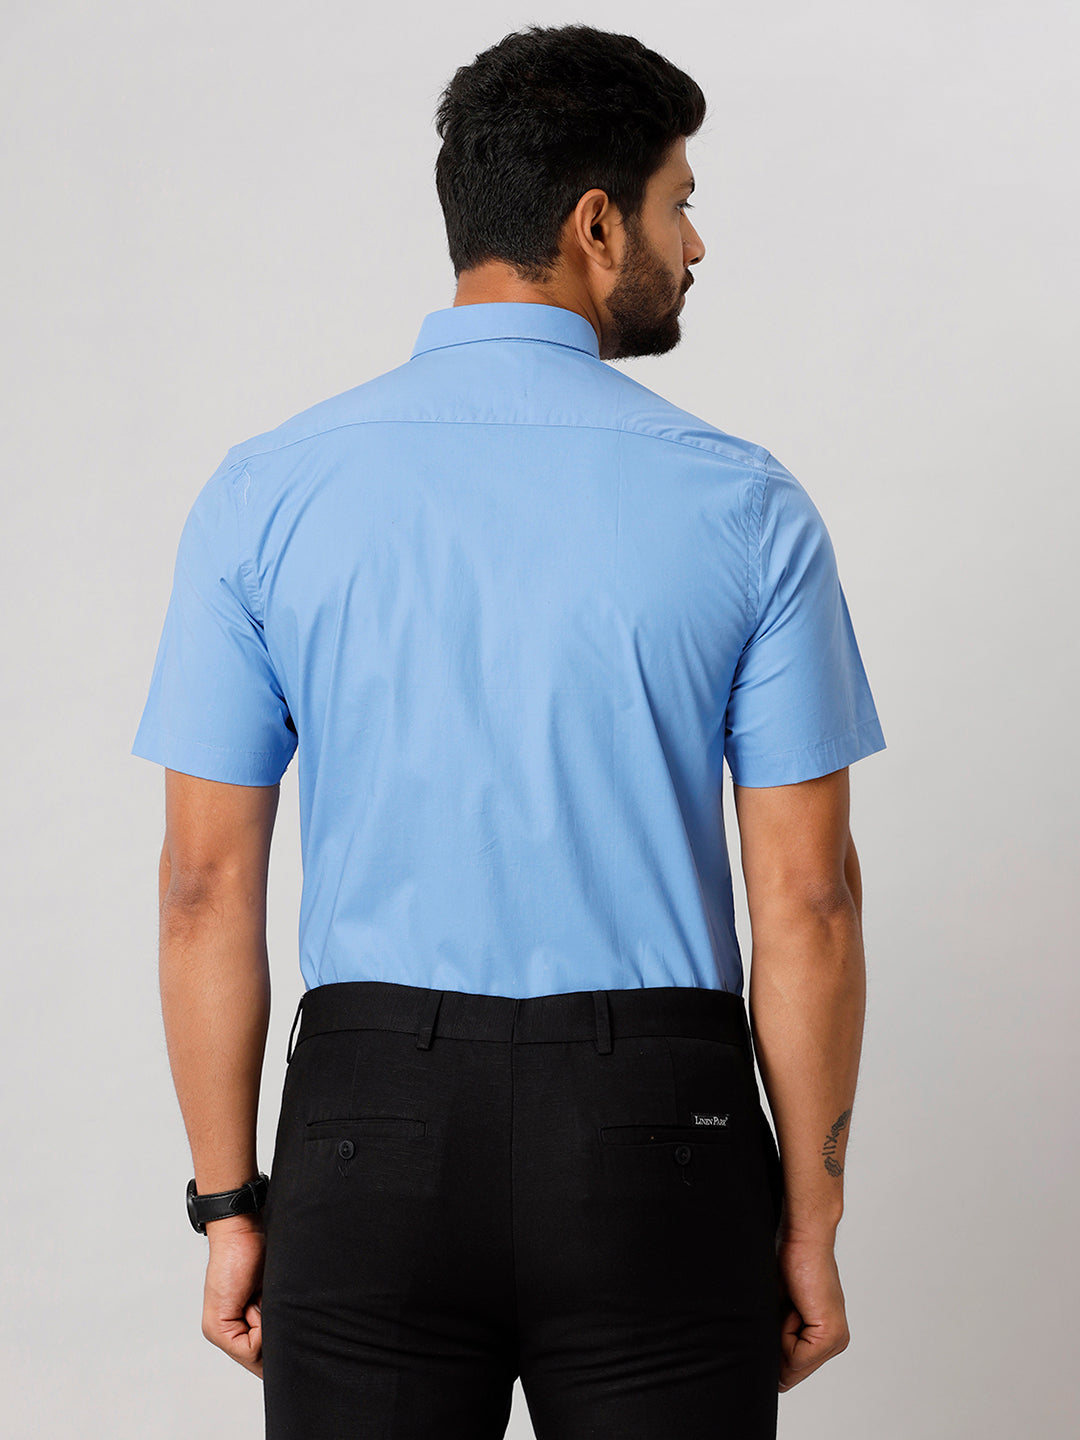 Mens Formal Cotton Spandex 2 Way Stretch Blue Half Sleeves Shirt LY8-Back view